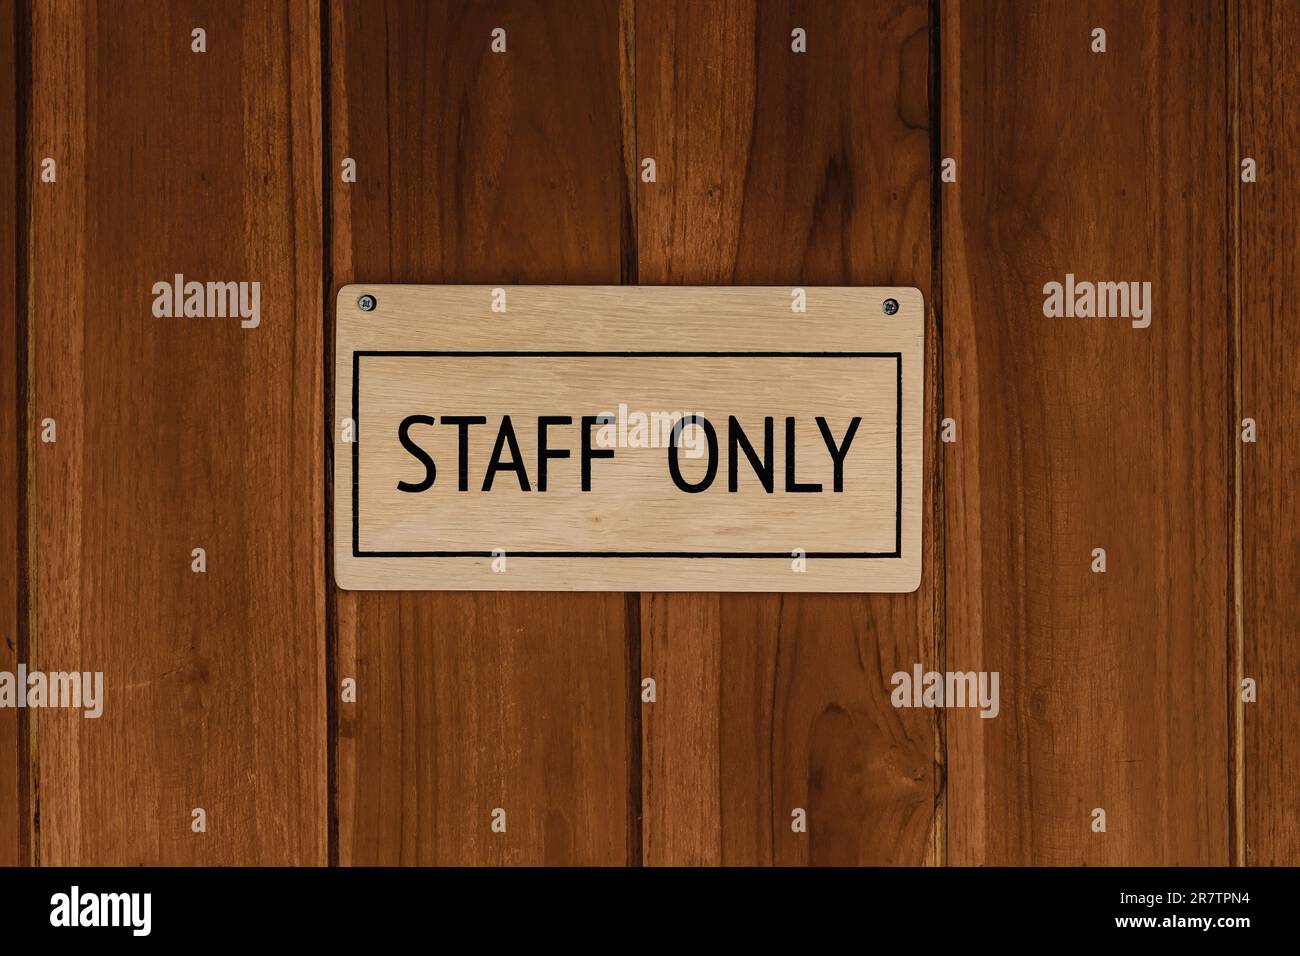 STAFF ONLY wood text badge sign banner on wooden door panel background. Stock Photo